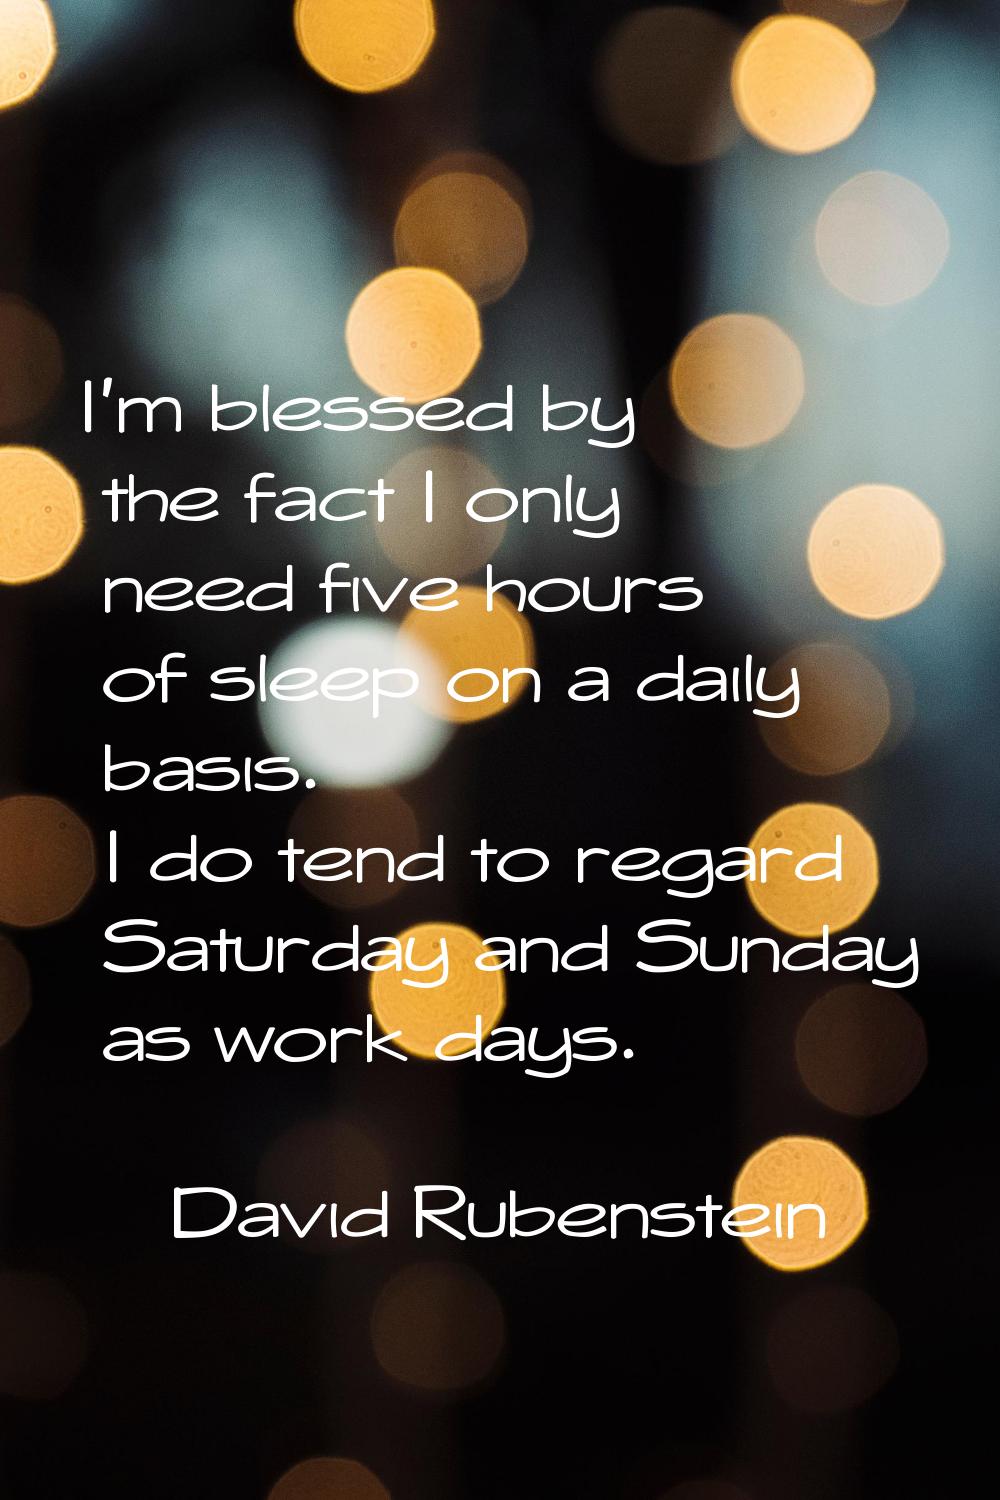 I'm blessed by the fact I only need five hours of sleep on a daily basis. I do tend to regard Satur